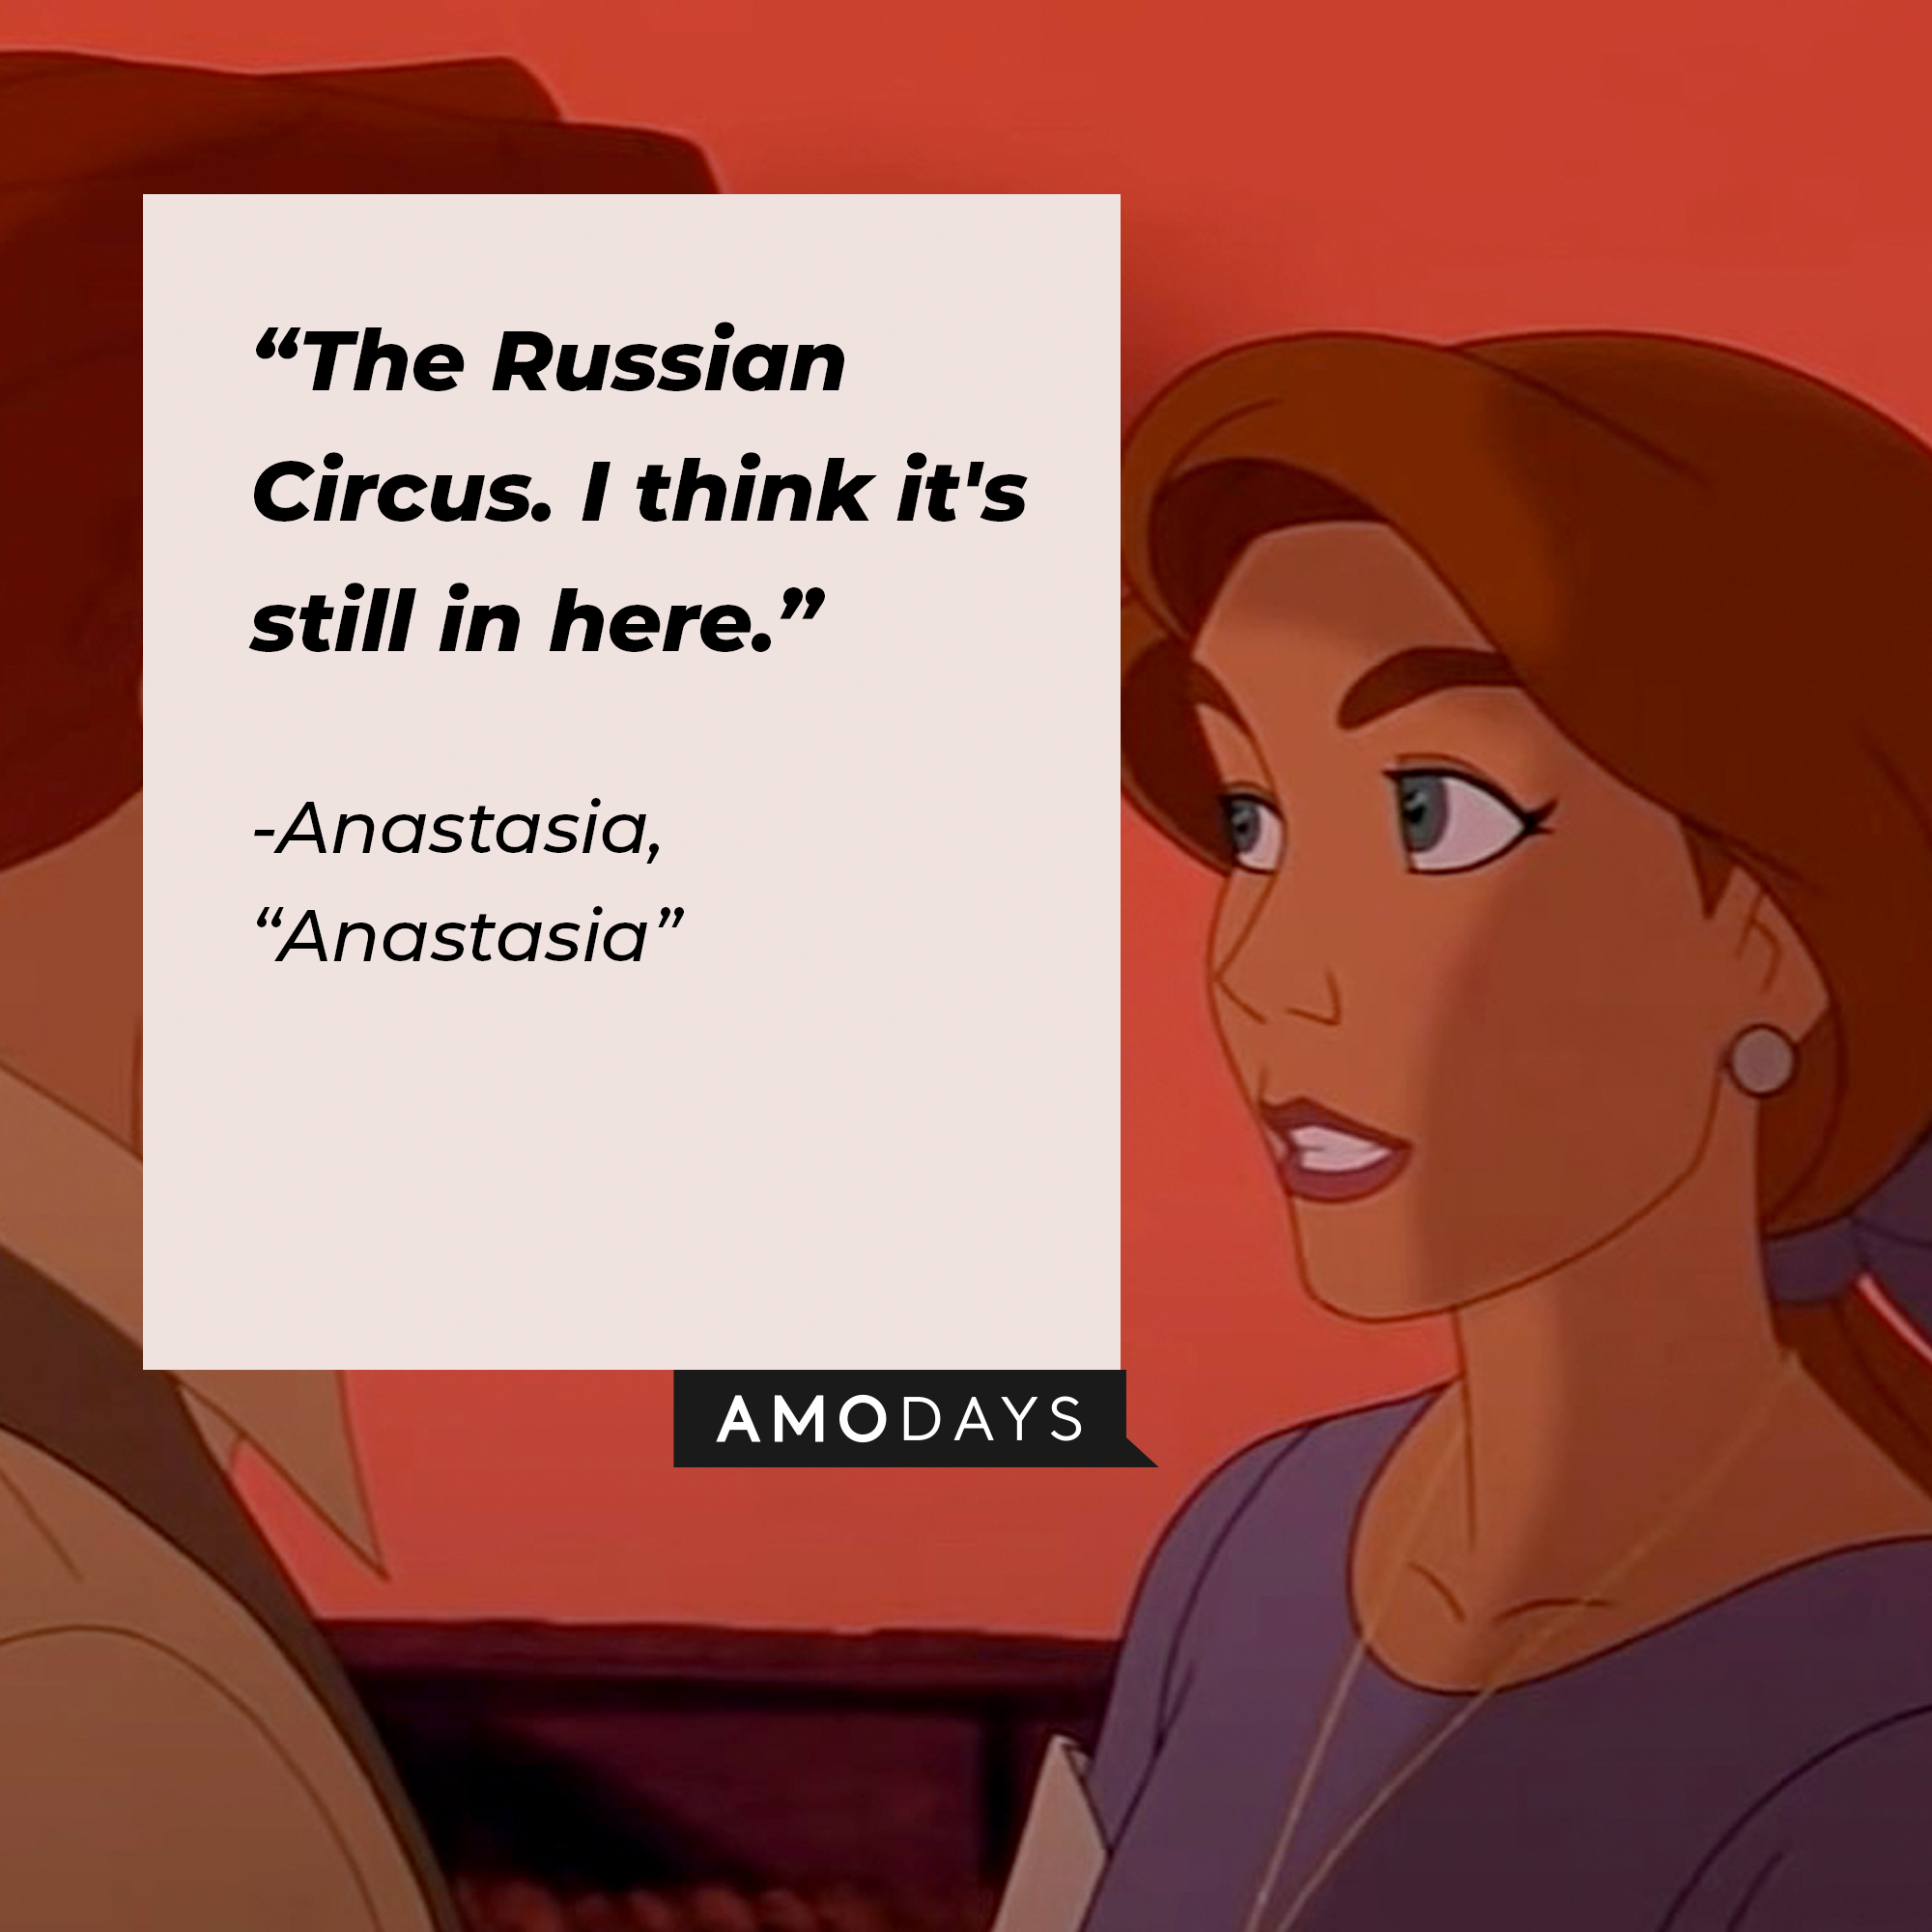 Image of Anastasia with the quote: “The Russian Circus. I think it's still in here.” | Source: Youtube.com/20thCenturyStudios